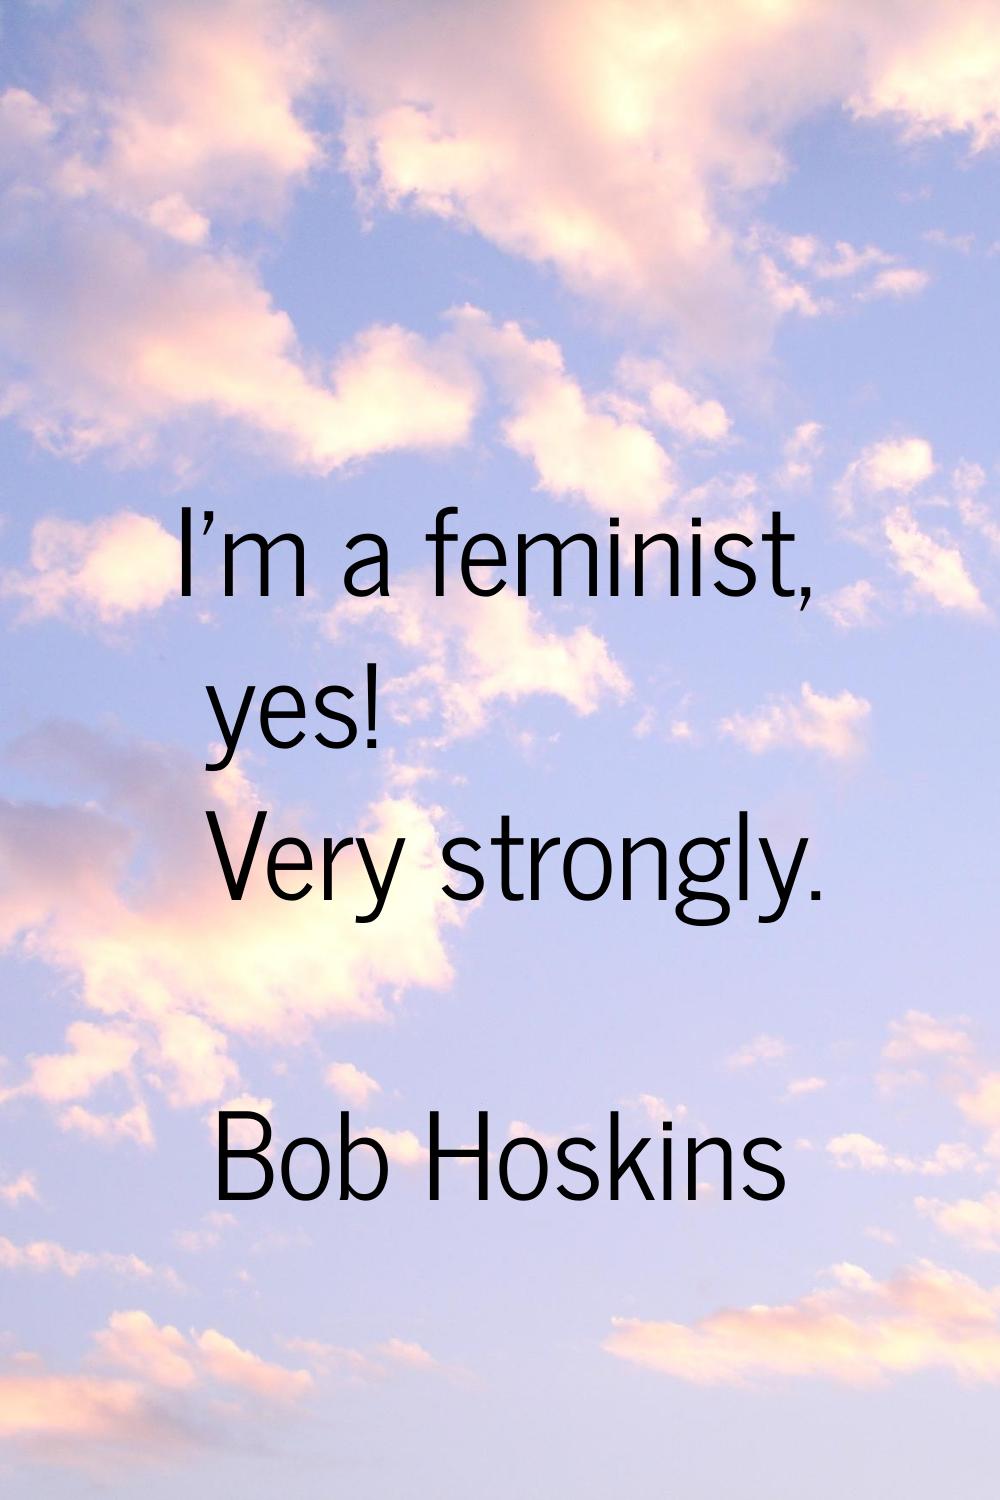 I'm a feminist, yes! Very strongly.